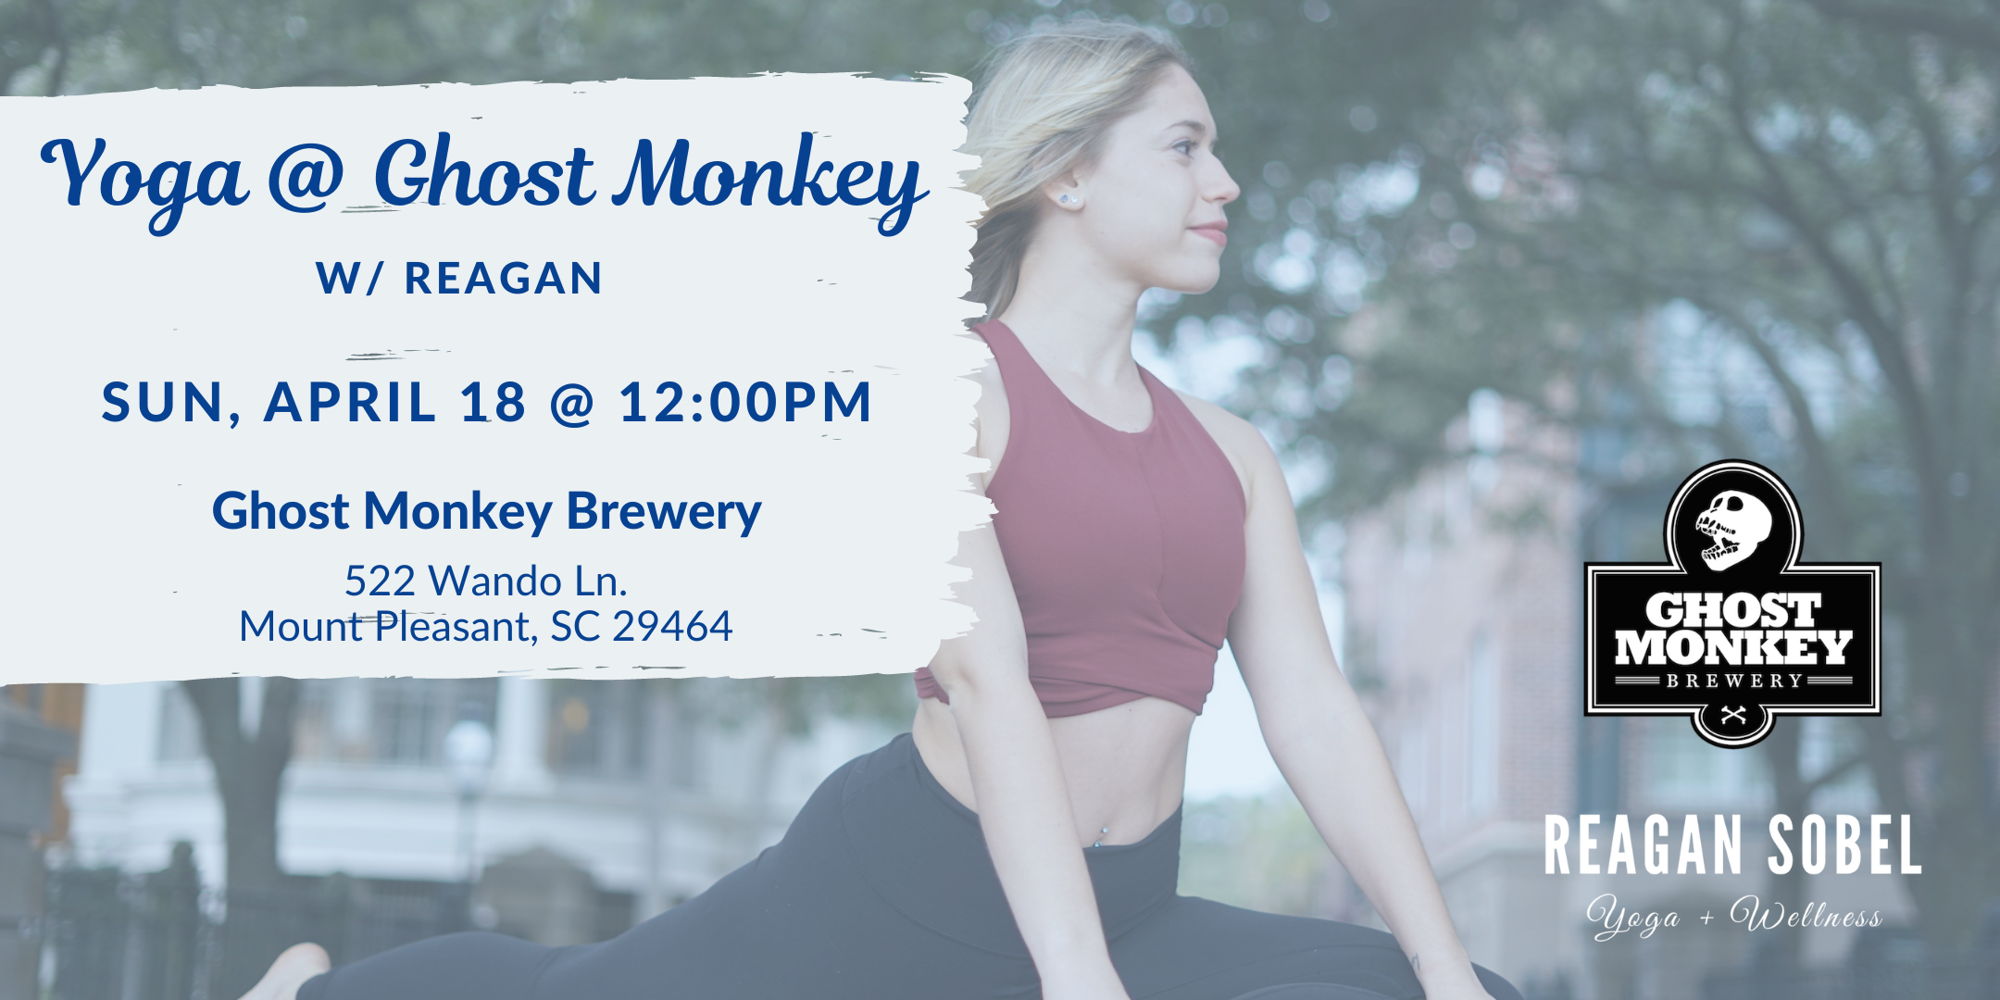 Outdoor Yoga at Ghost Monkey Brewery w/ Reagan Sobel promotional image